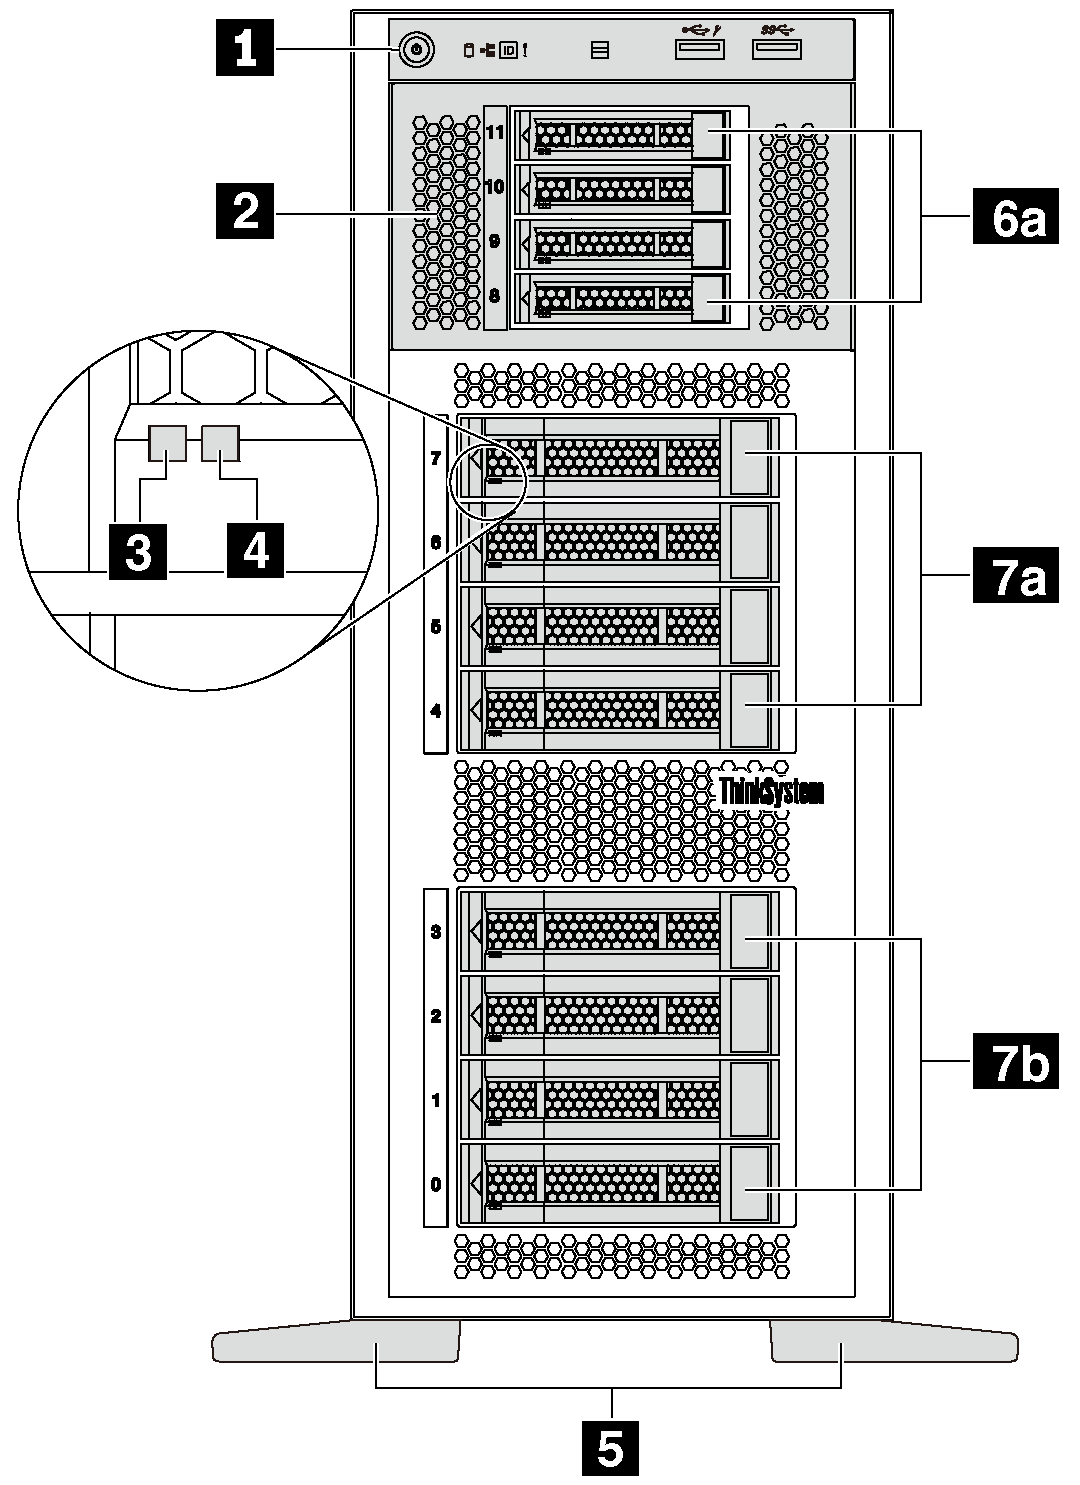 Front view of server models with eight 3.5-inch-drive bays and four 2.5-inch-drive bays